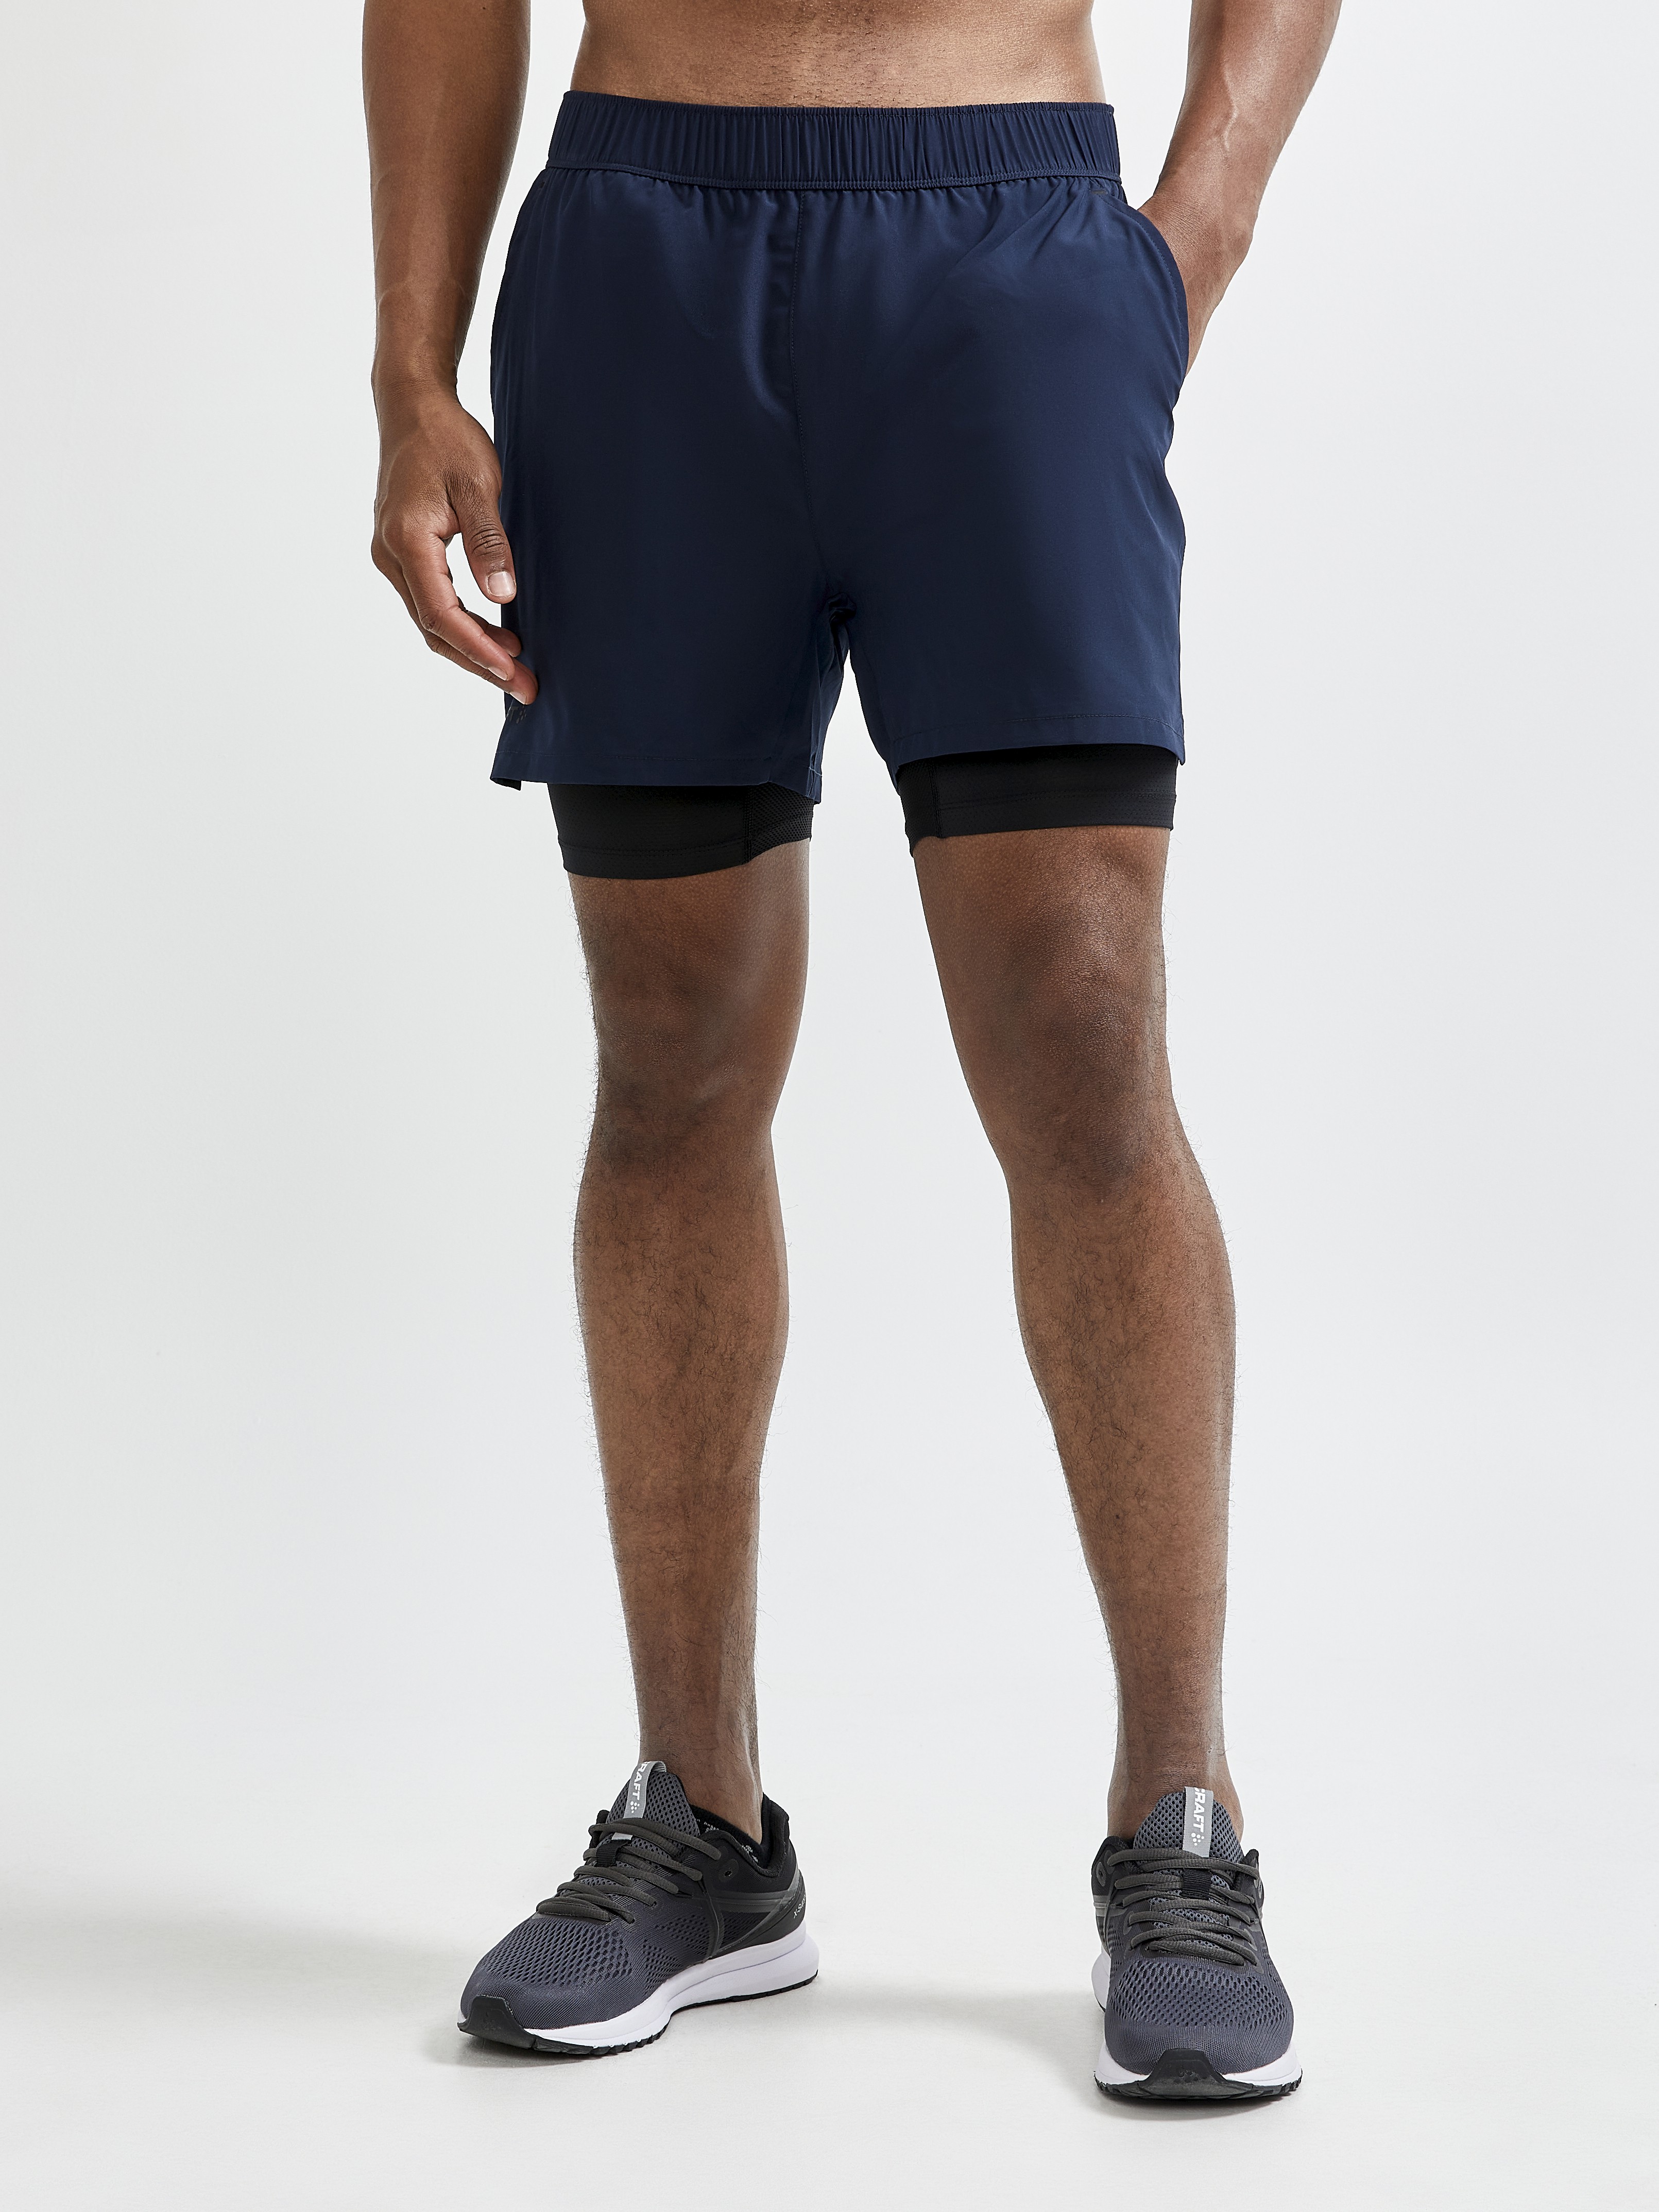 Craft émotion Sweat Shorts 2019 HOMMES Y Running Jogging Shorts 1905792 